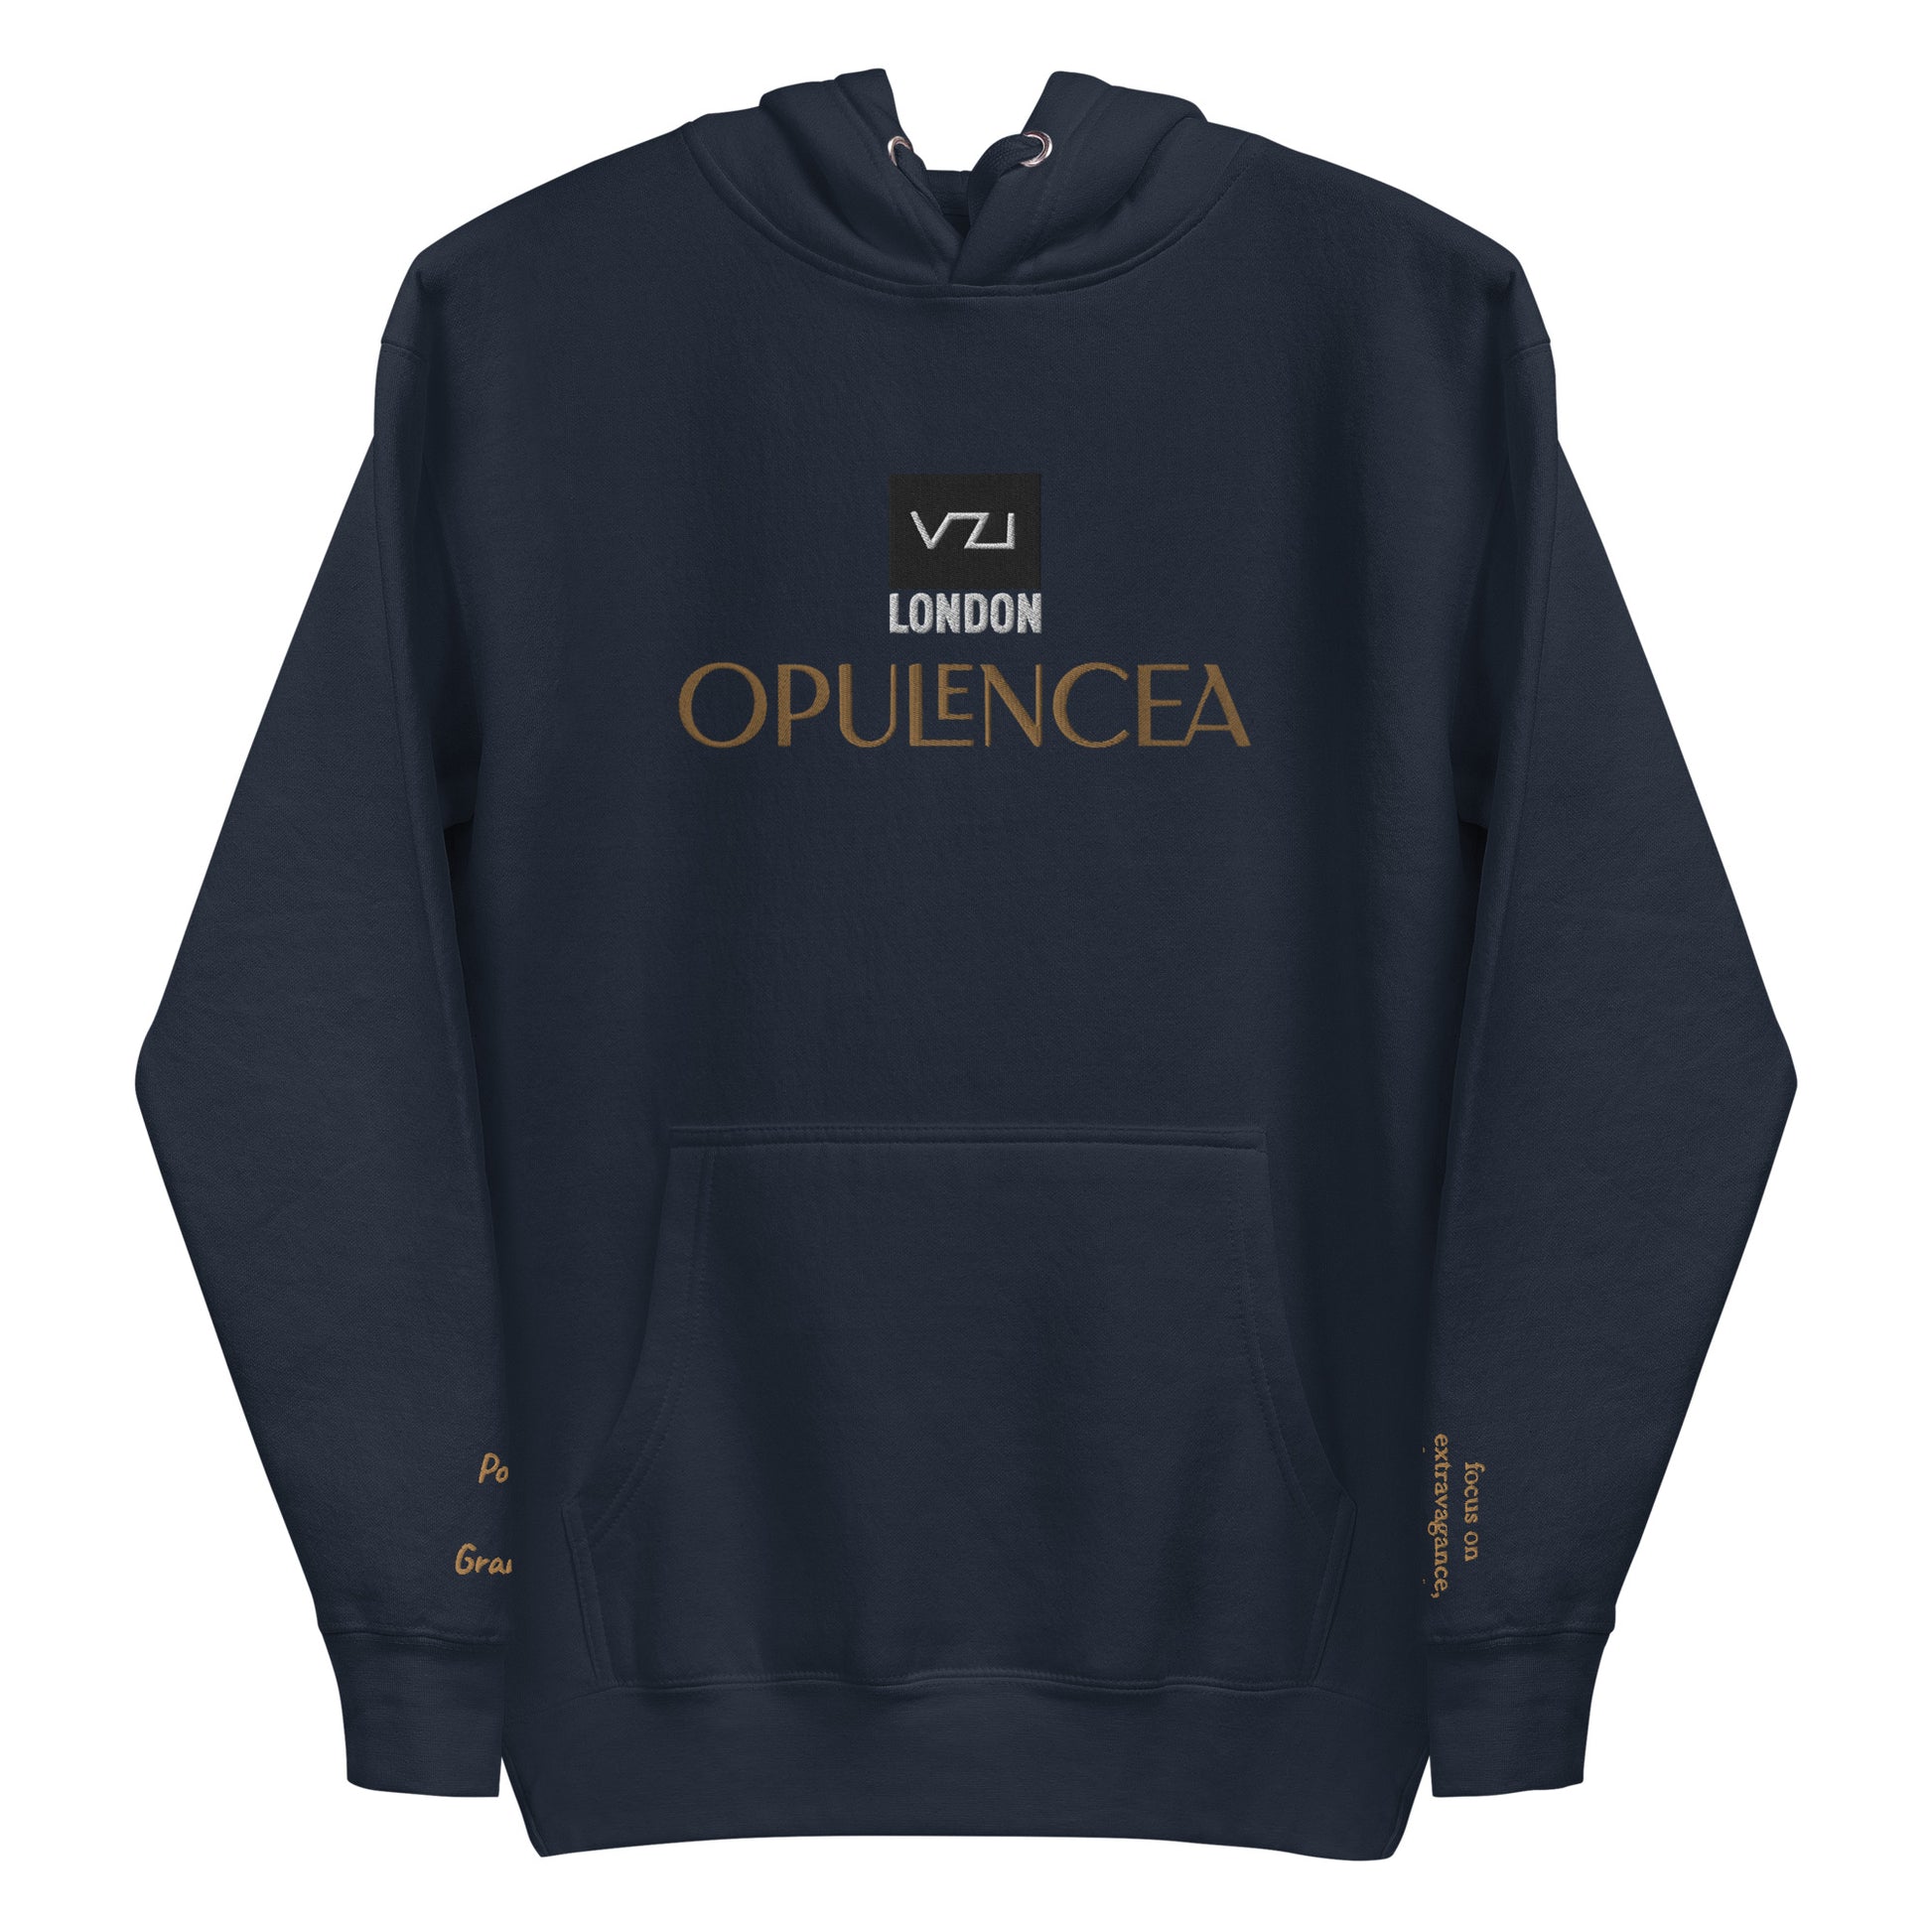 Upgrade your wardrobe with Opulencea, a luxurious and comfortable cotton hoodie. With a front pouch pocket, 3-panel hood, and matching drawstrings, this hoodie offers style.